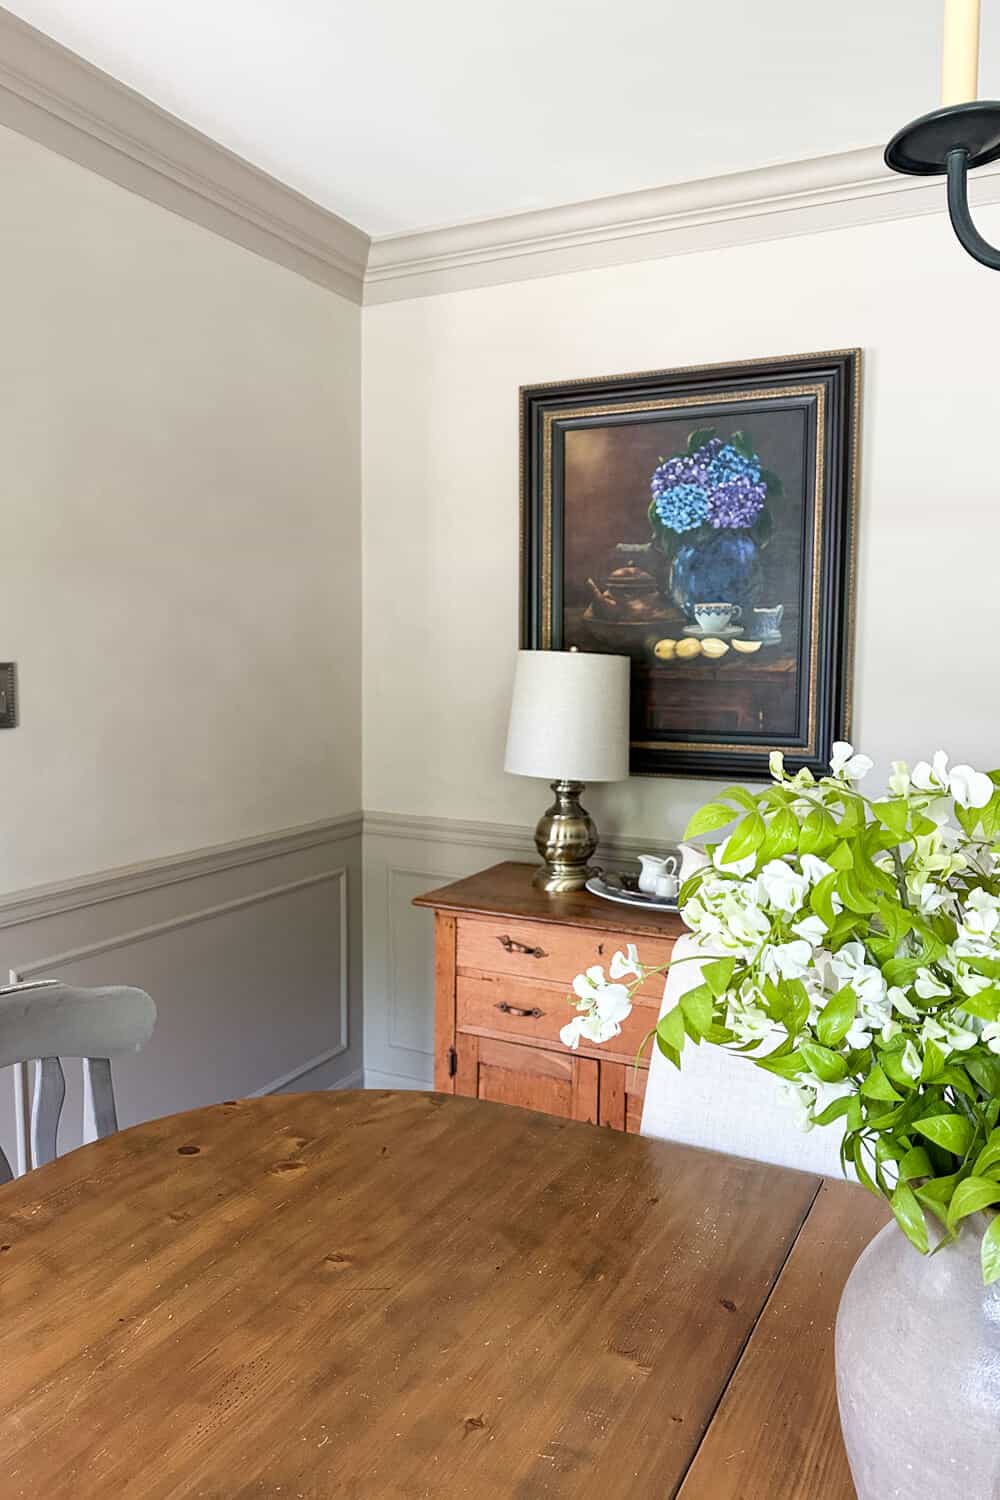 oil painting with hydrangeas hanging on a limewashed wall in a dining room